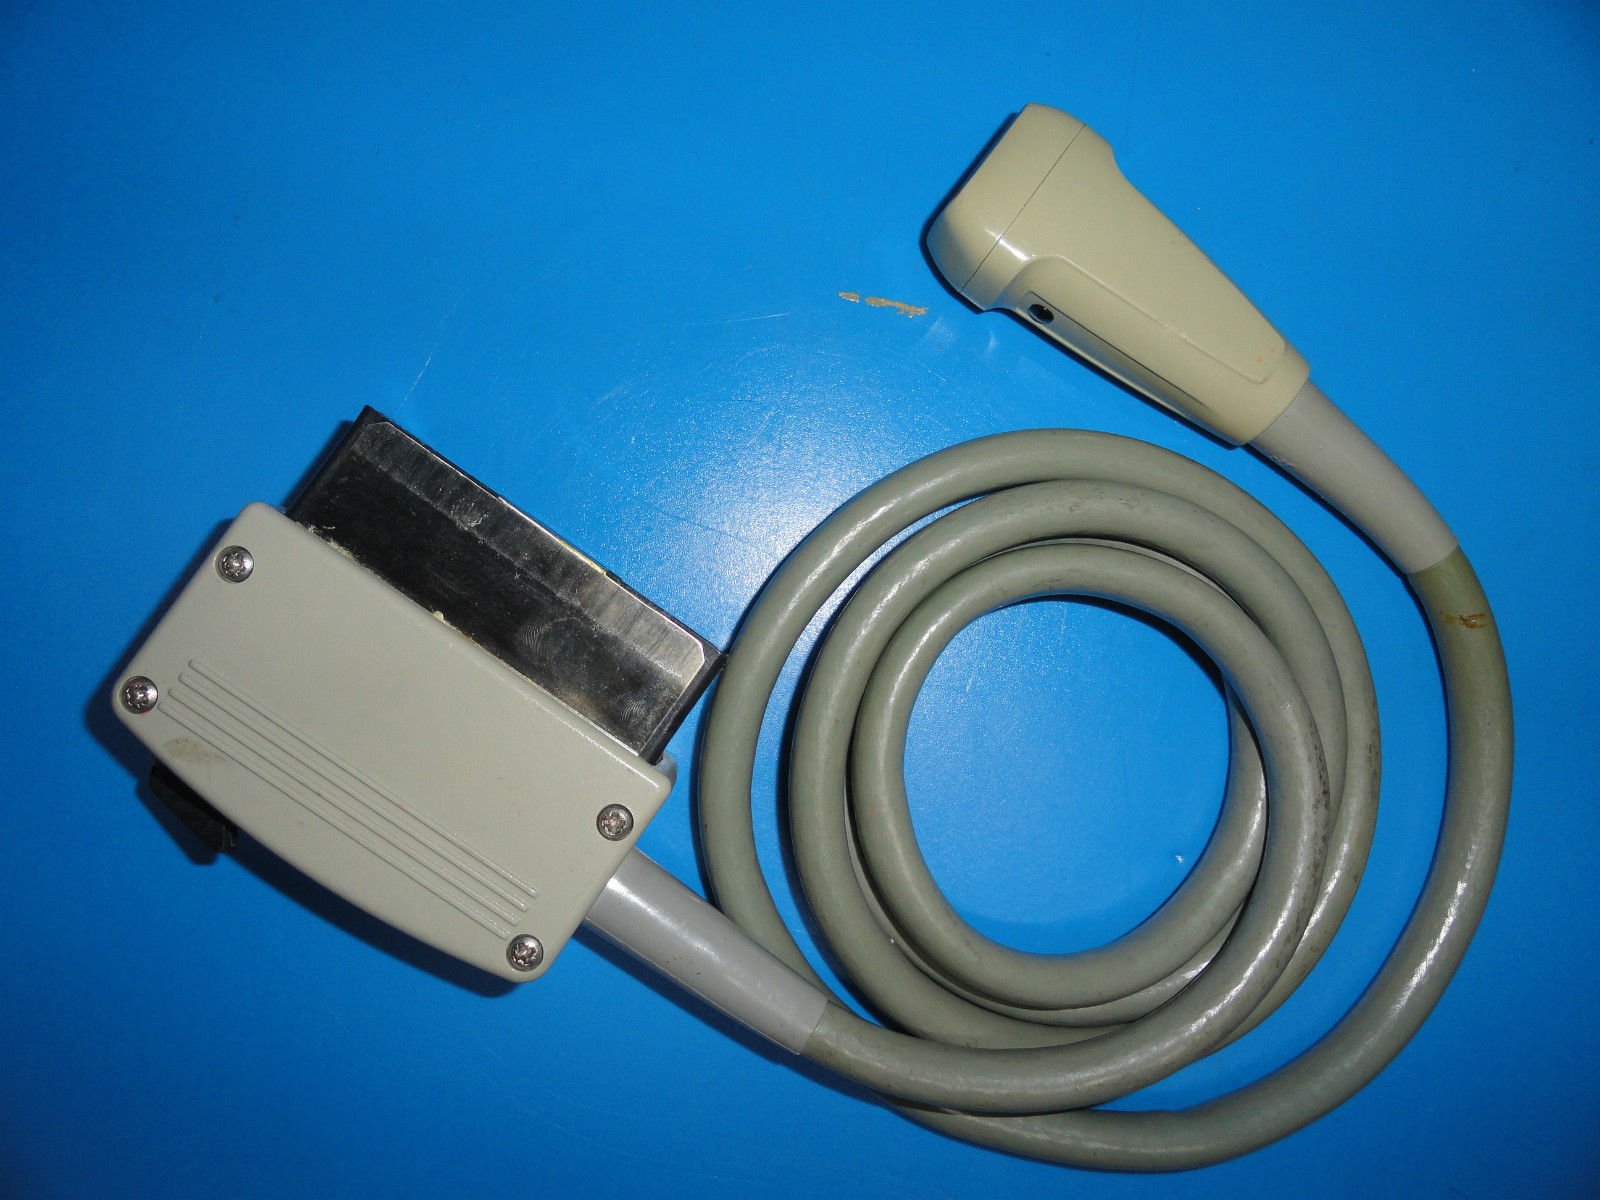 a cable connected to a device on a blue surface